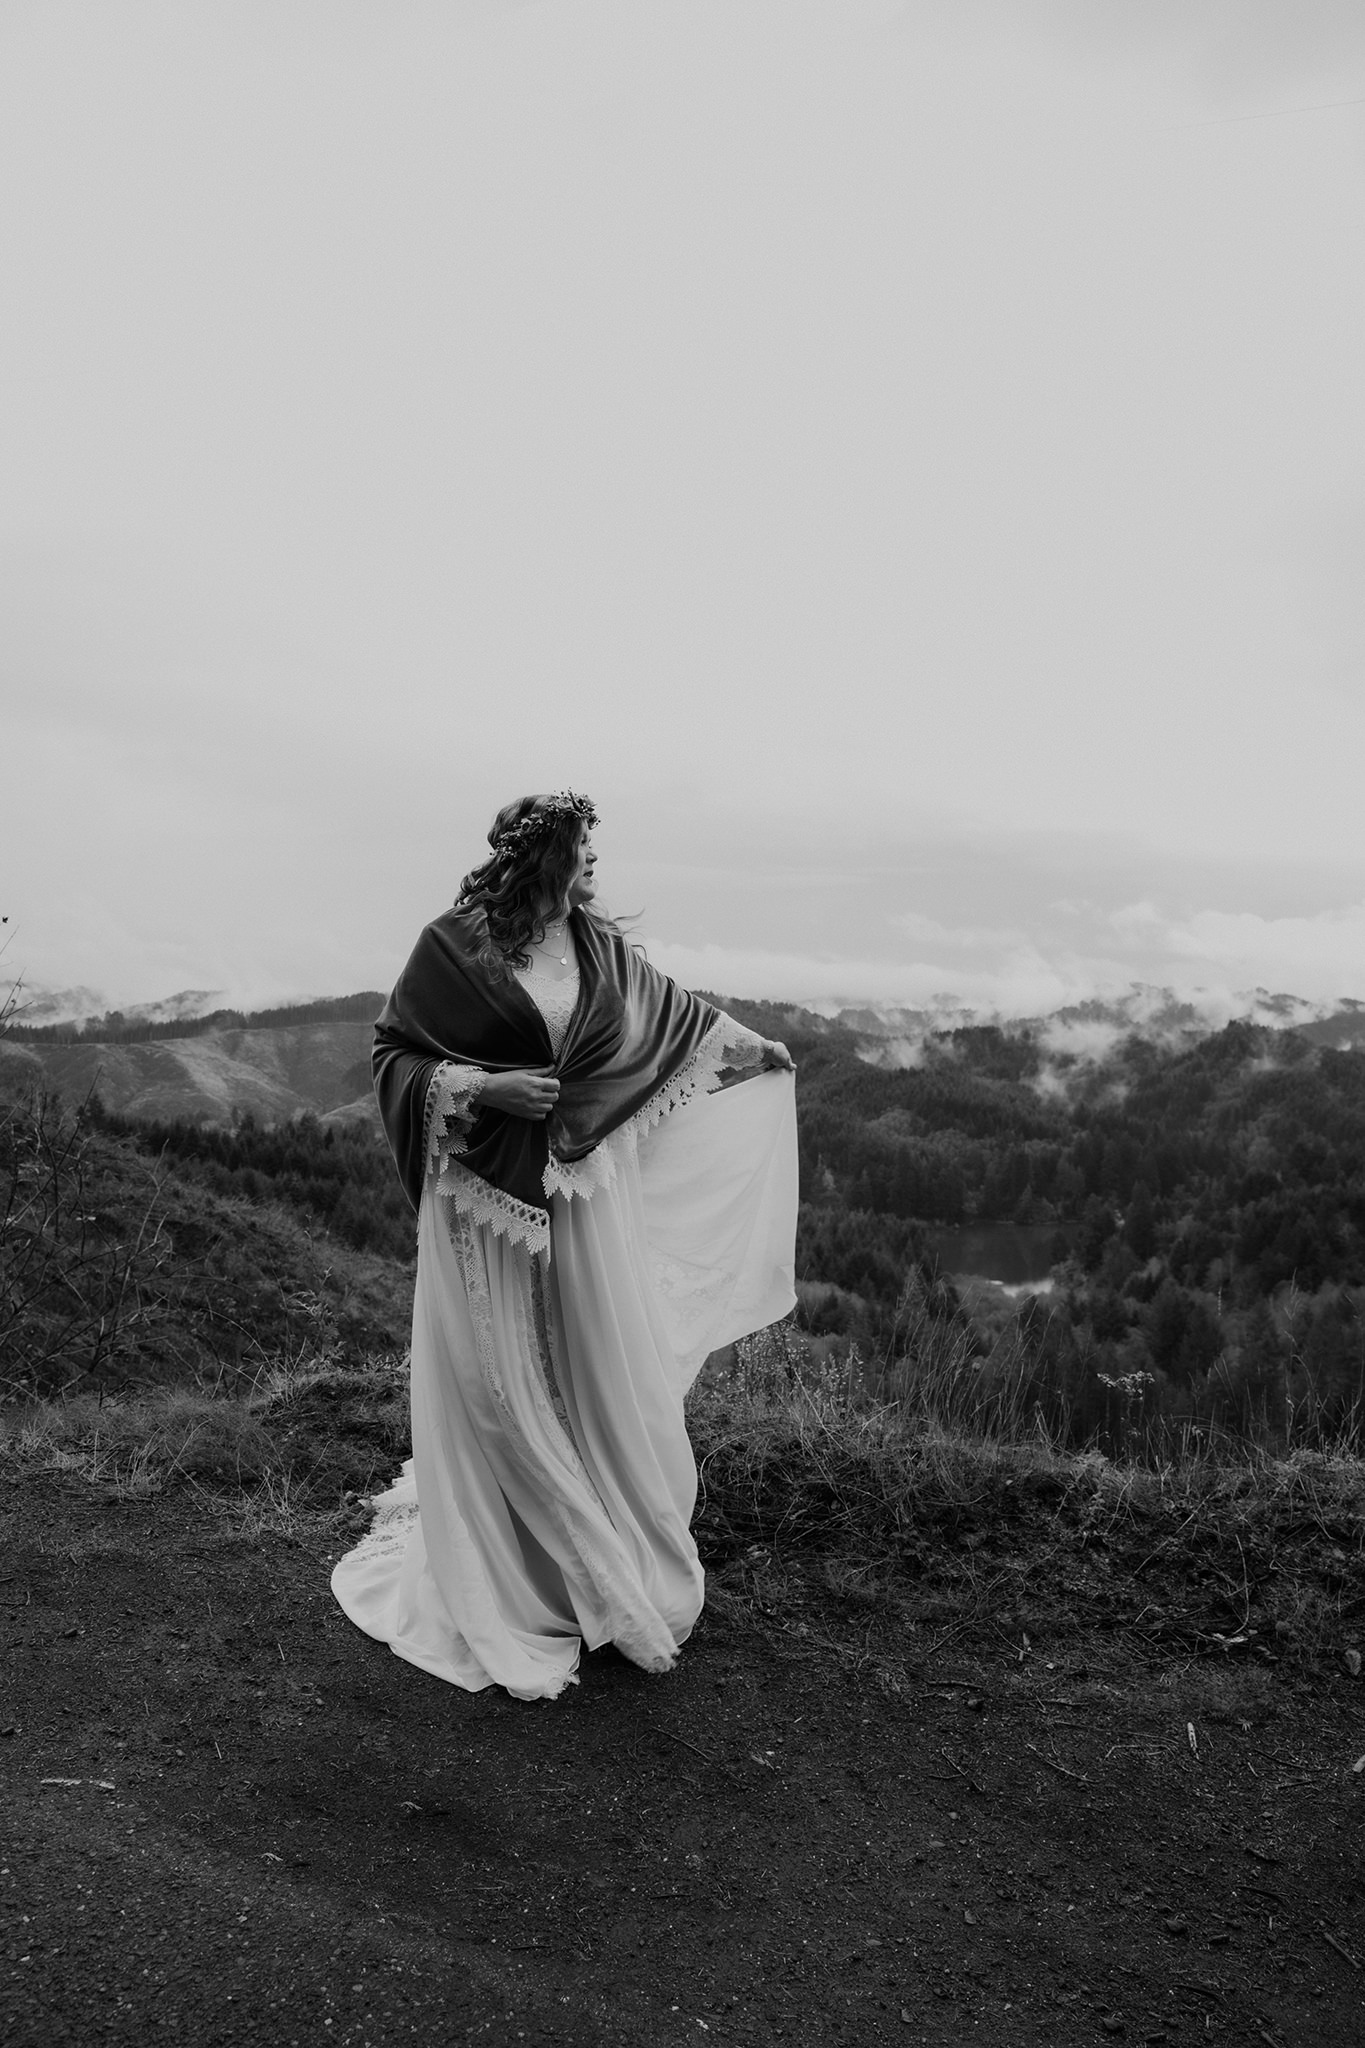 A moody black and white photo of a bride in southern Oregon